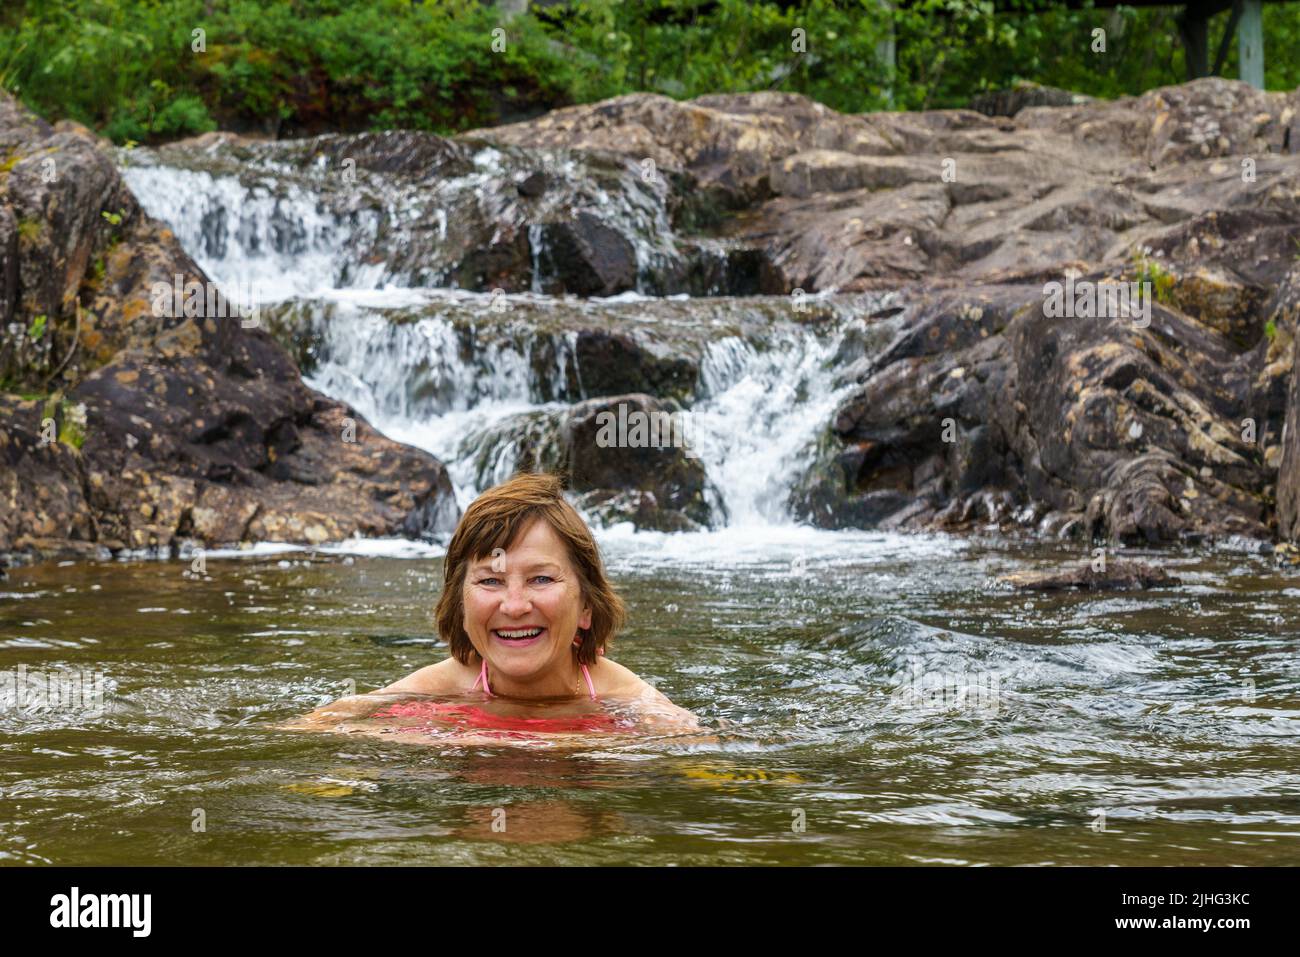 Woman swimming in a pool of water in Storforsen nature reserve, Älvsbyn county, Norrbotten province, Sweden Stock Photo